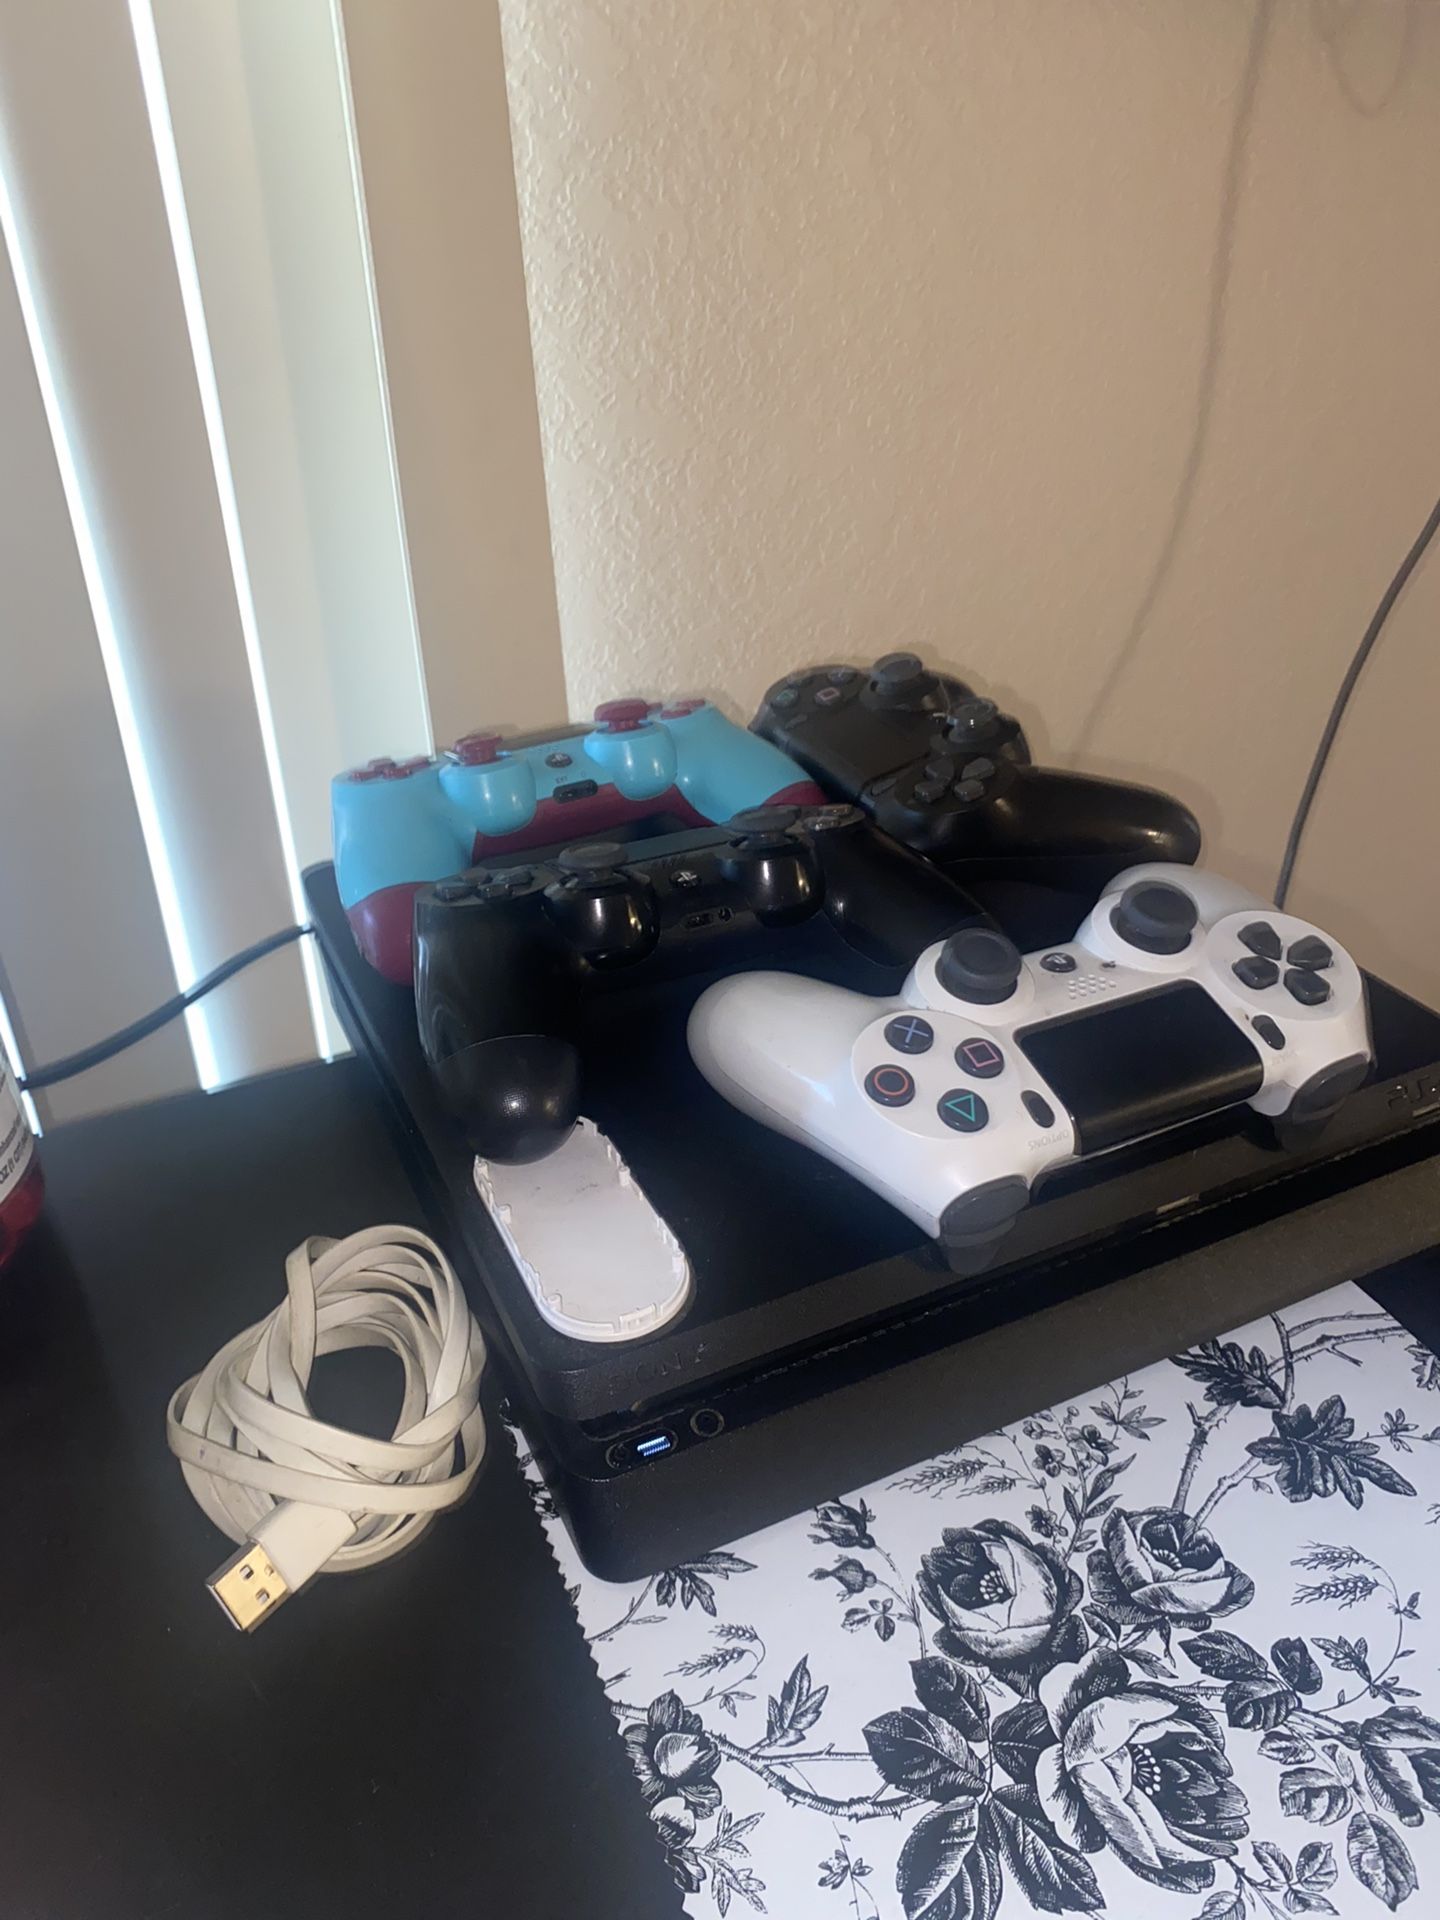 PS4 Slim - With Games And Controllers 